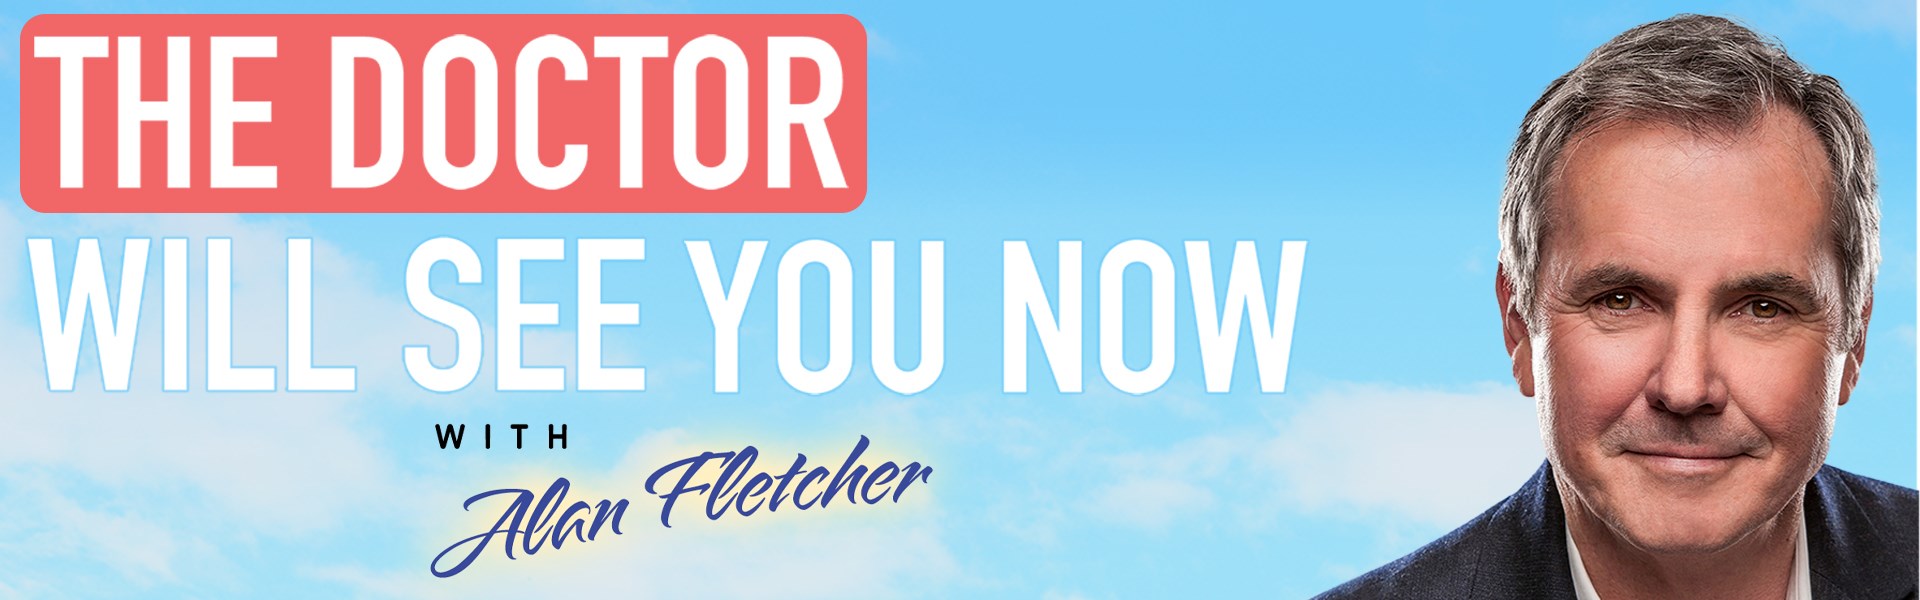 The Doctor Will See You Now – An Evening With Alan Fletcher